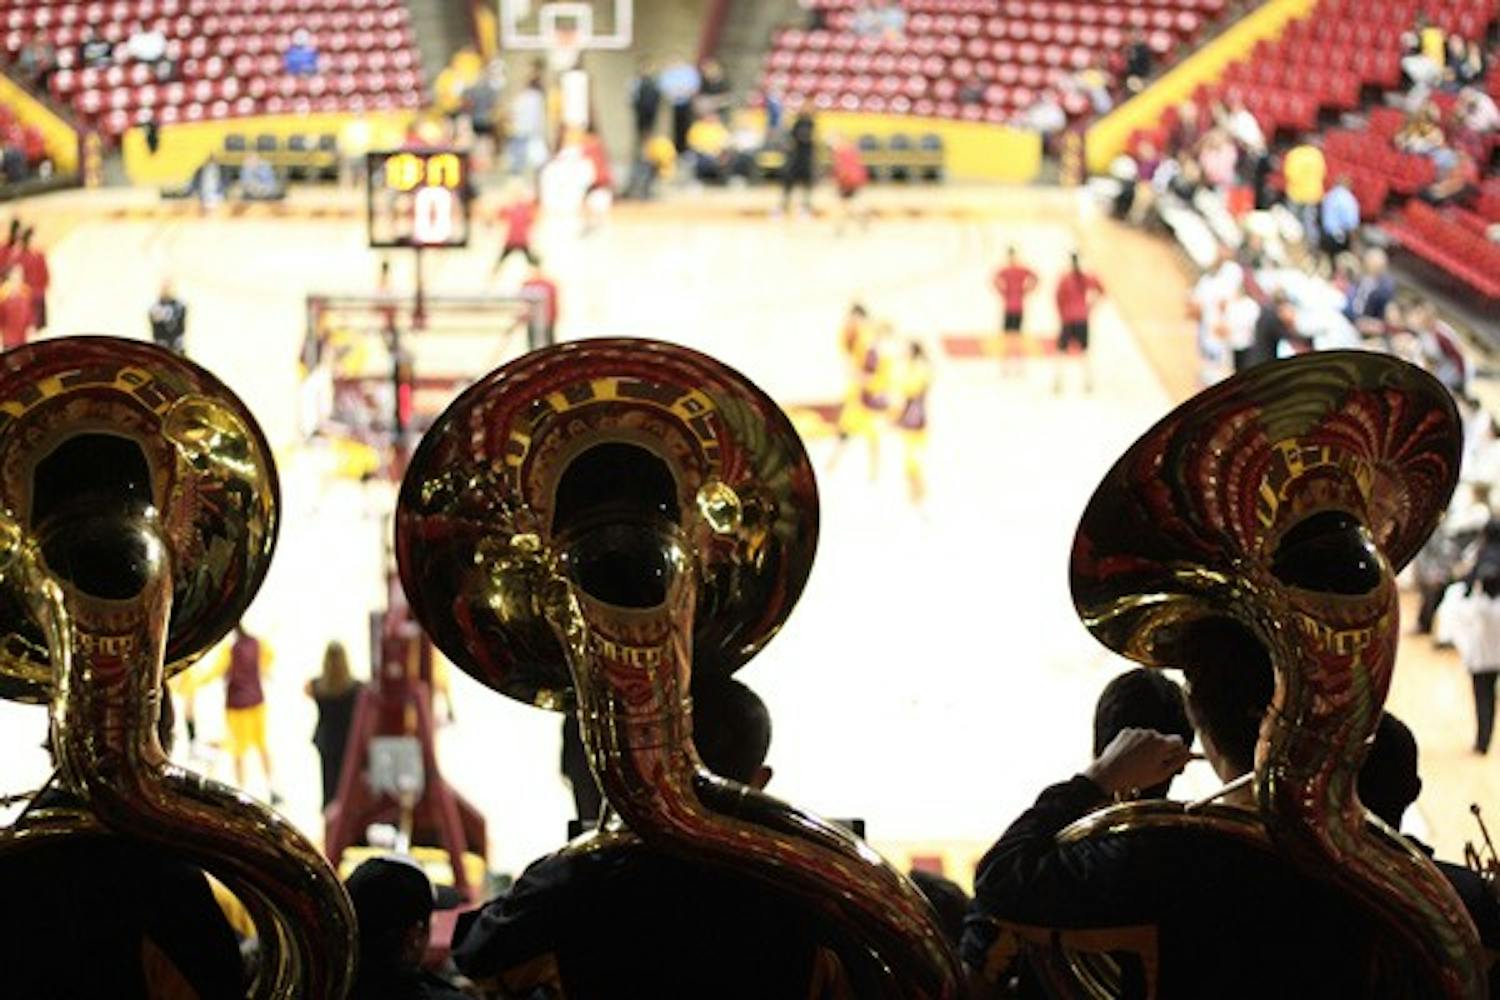 TUBA TERRITORY: The ASU marching band livens up the crowd at the women's basketball game on Thursday night. (Photo by Rosie Gochnour)